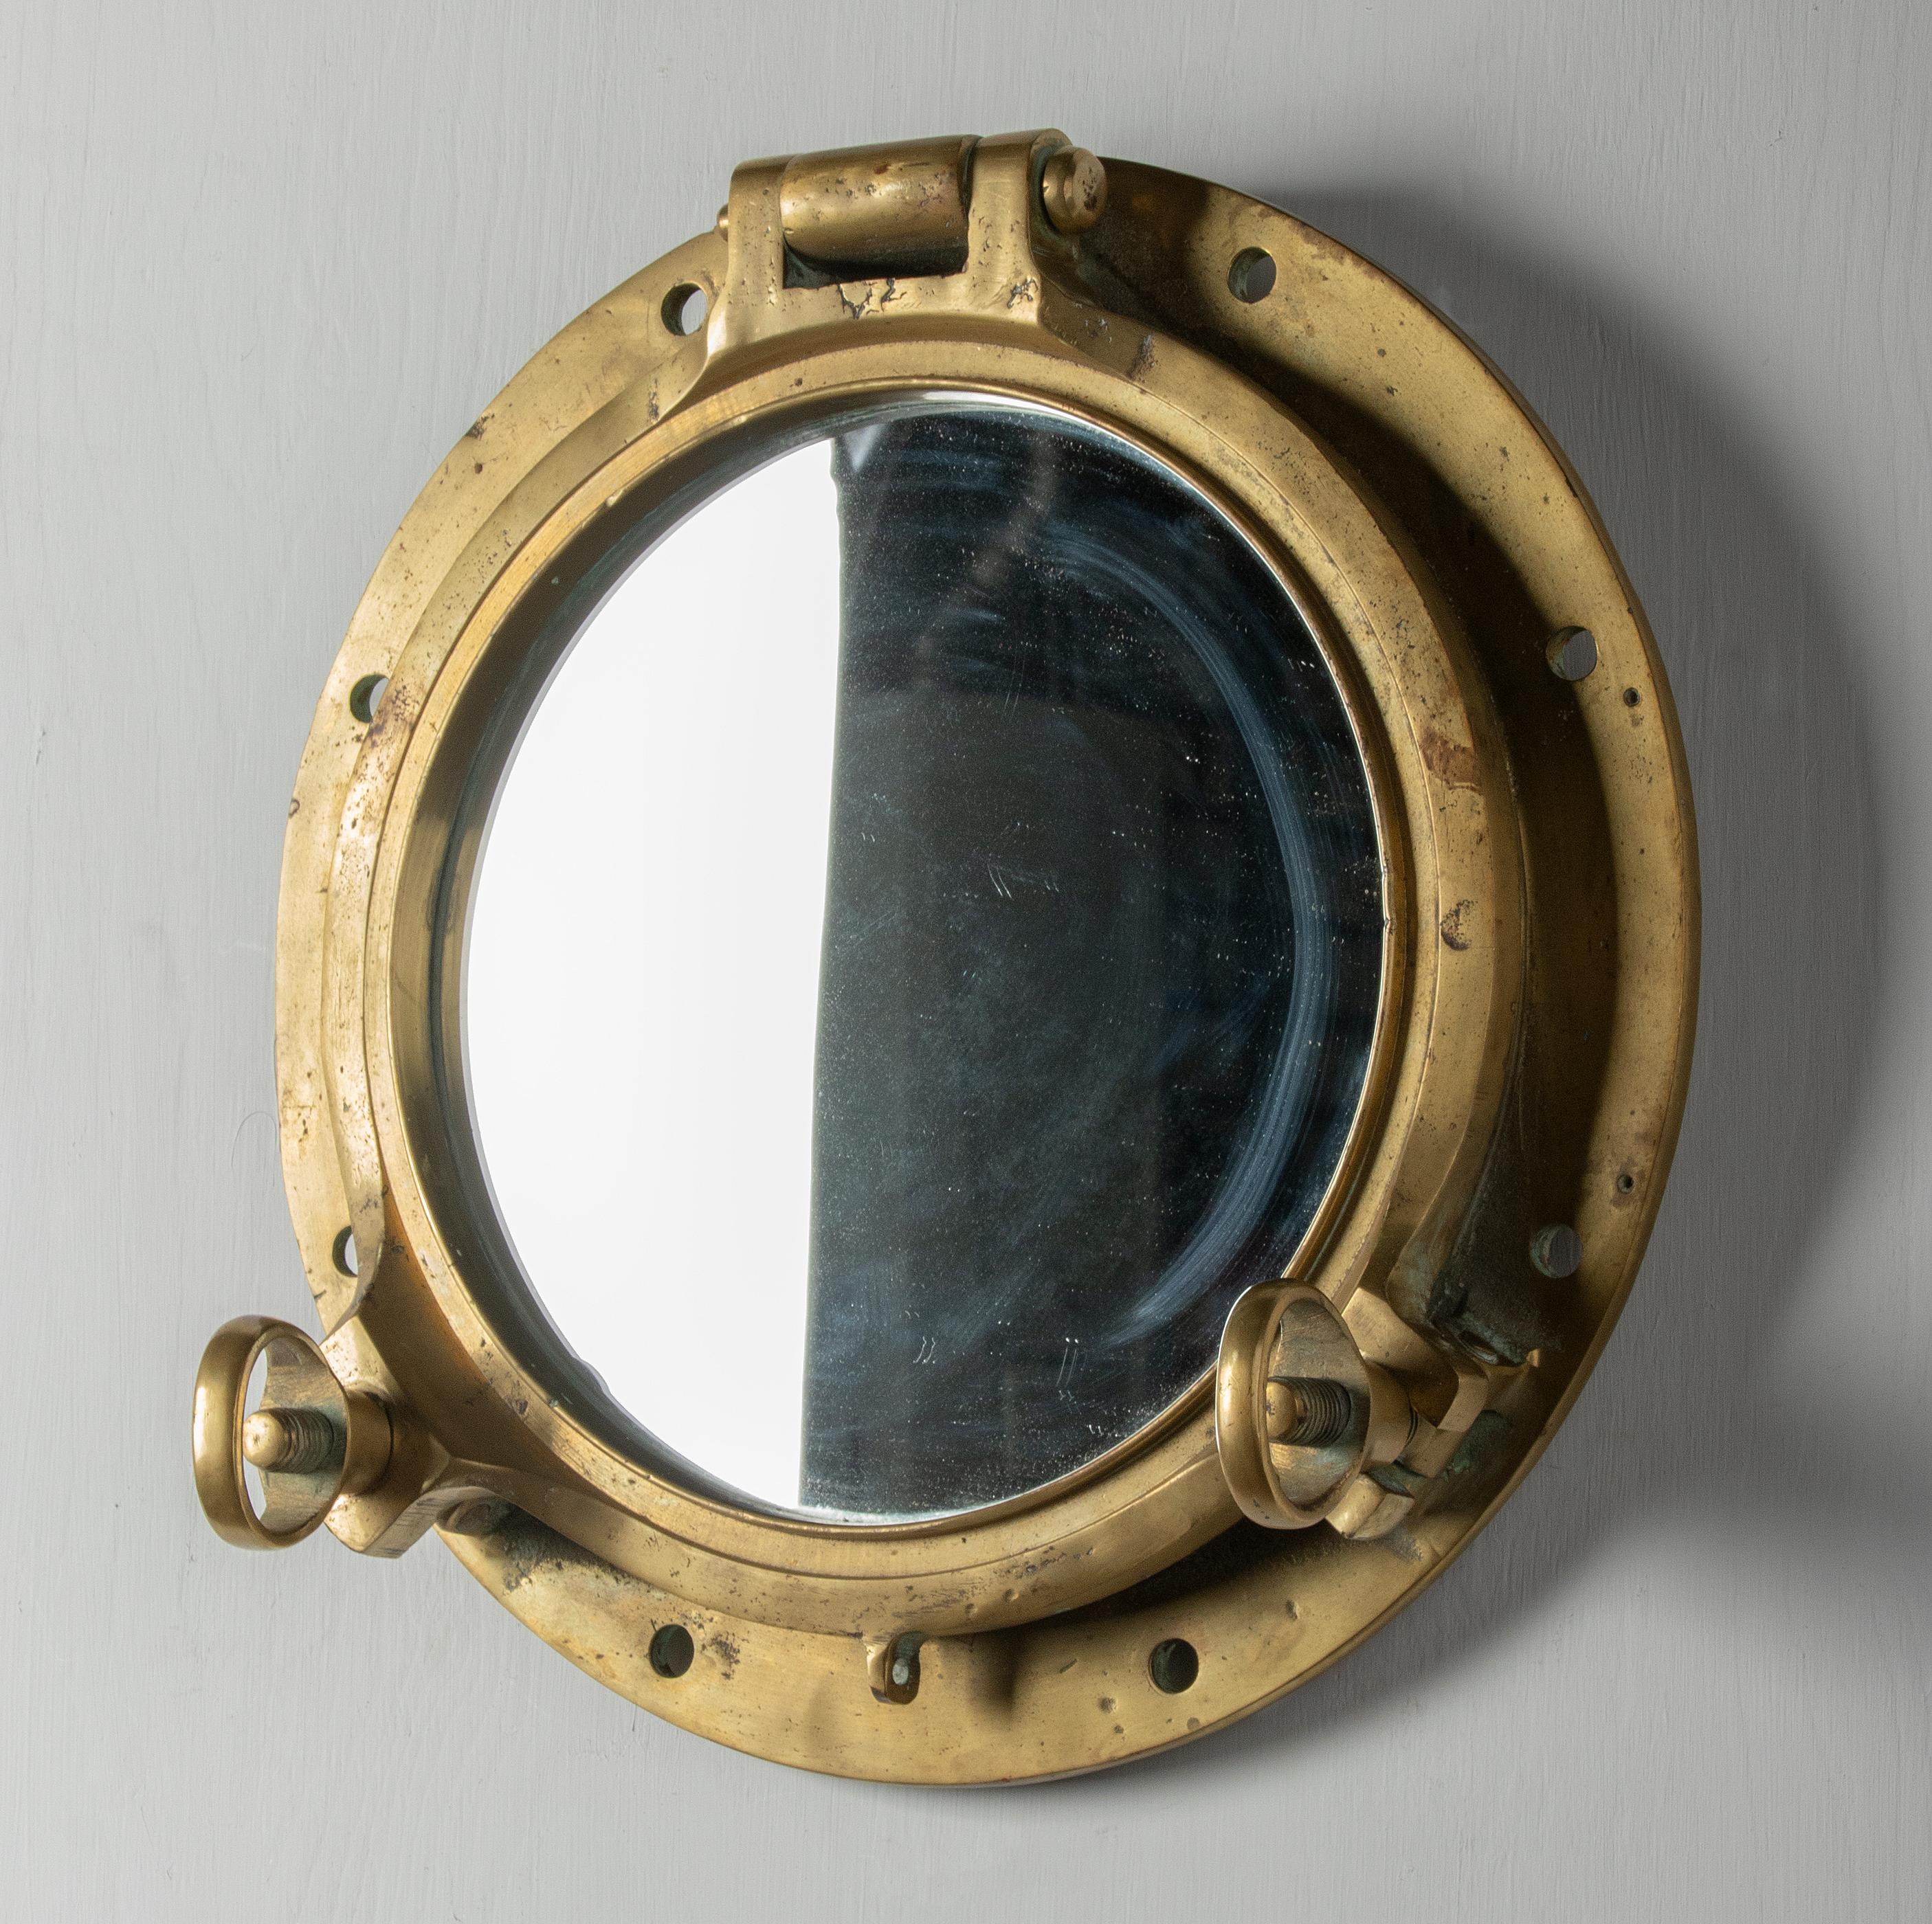 An antique heavy duty ship porthole wall mirror made of brass. A mirror glass has been placed inside. The whole has a beautiful old patina. This maritime object was made around 1900-1930, origin unknown.

The dimensions are 45 cm x 45 x 12 cm